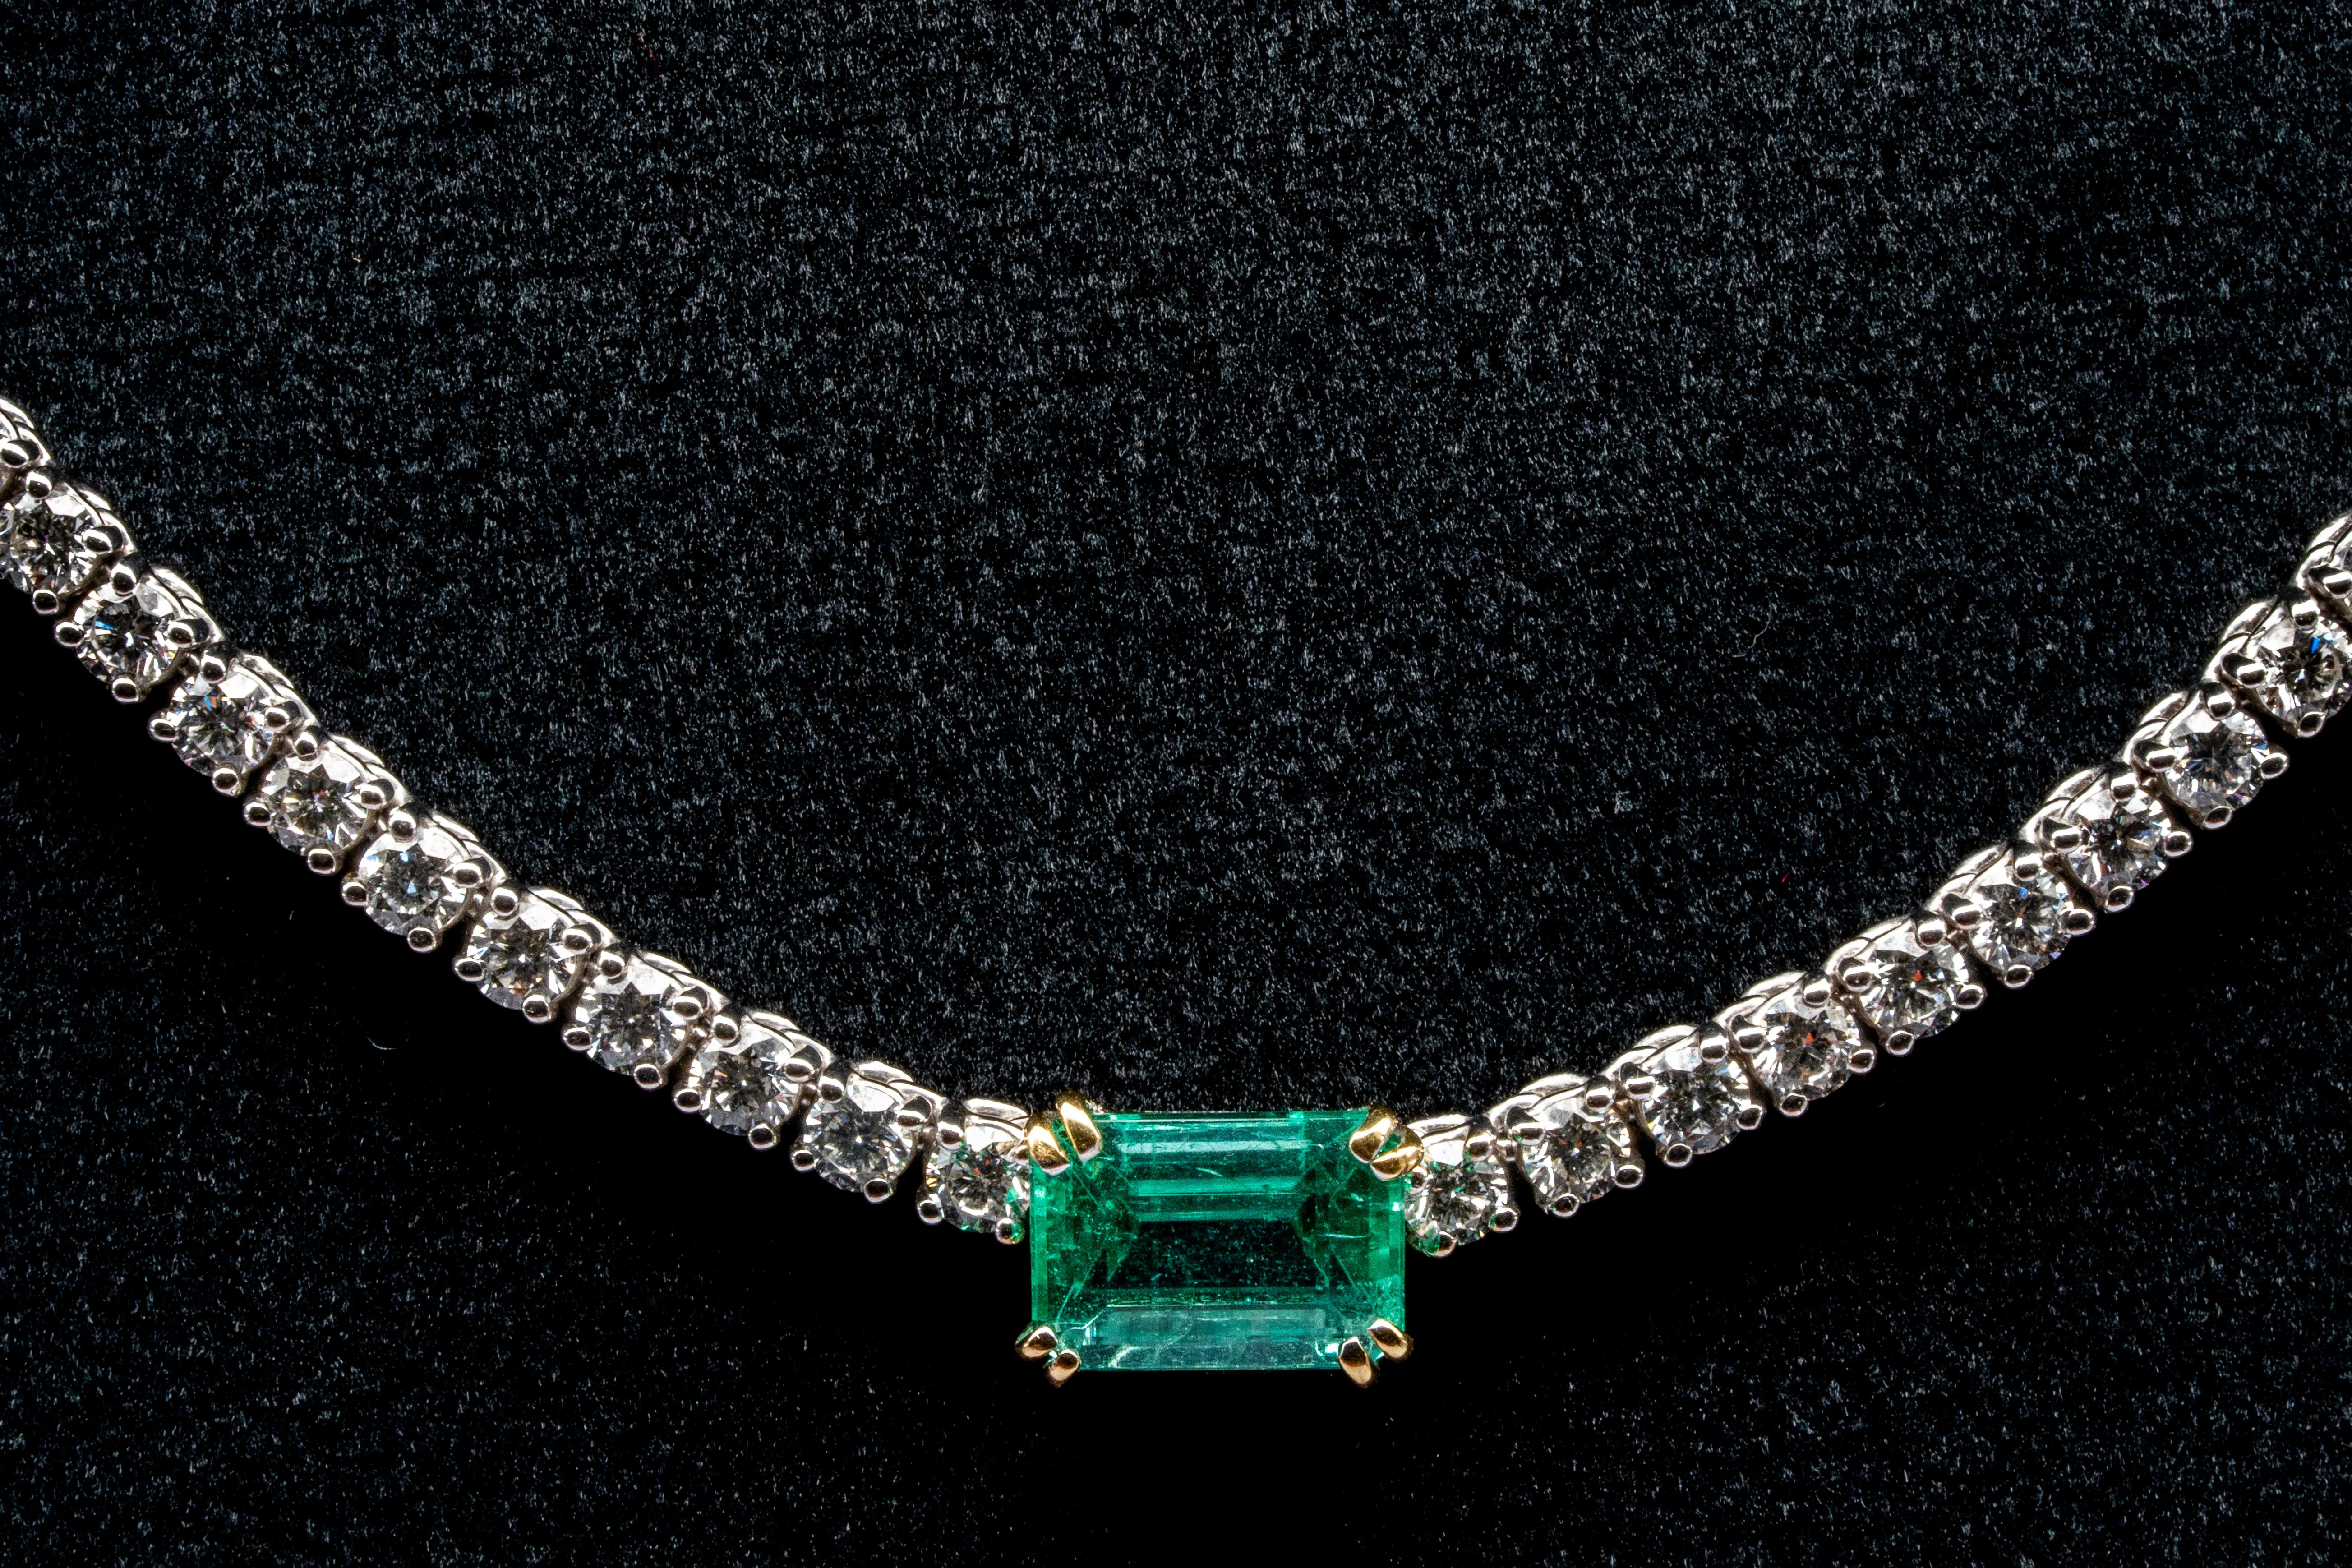 Brilliant Cut 7.25 Carat VS G White Gold Tennis Necklace with Colombian Emerald Carat 2.15 For Sale